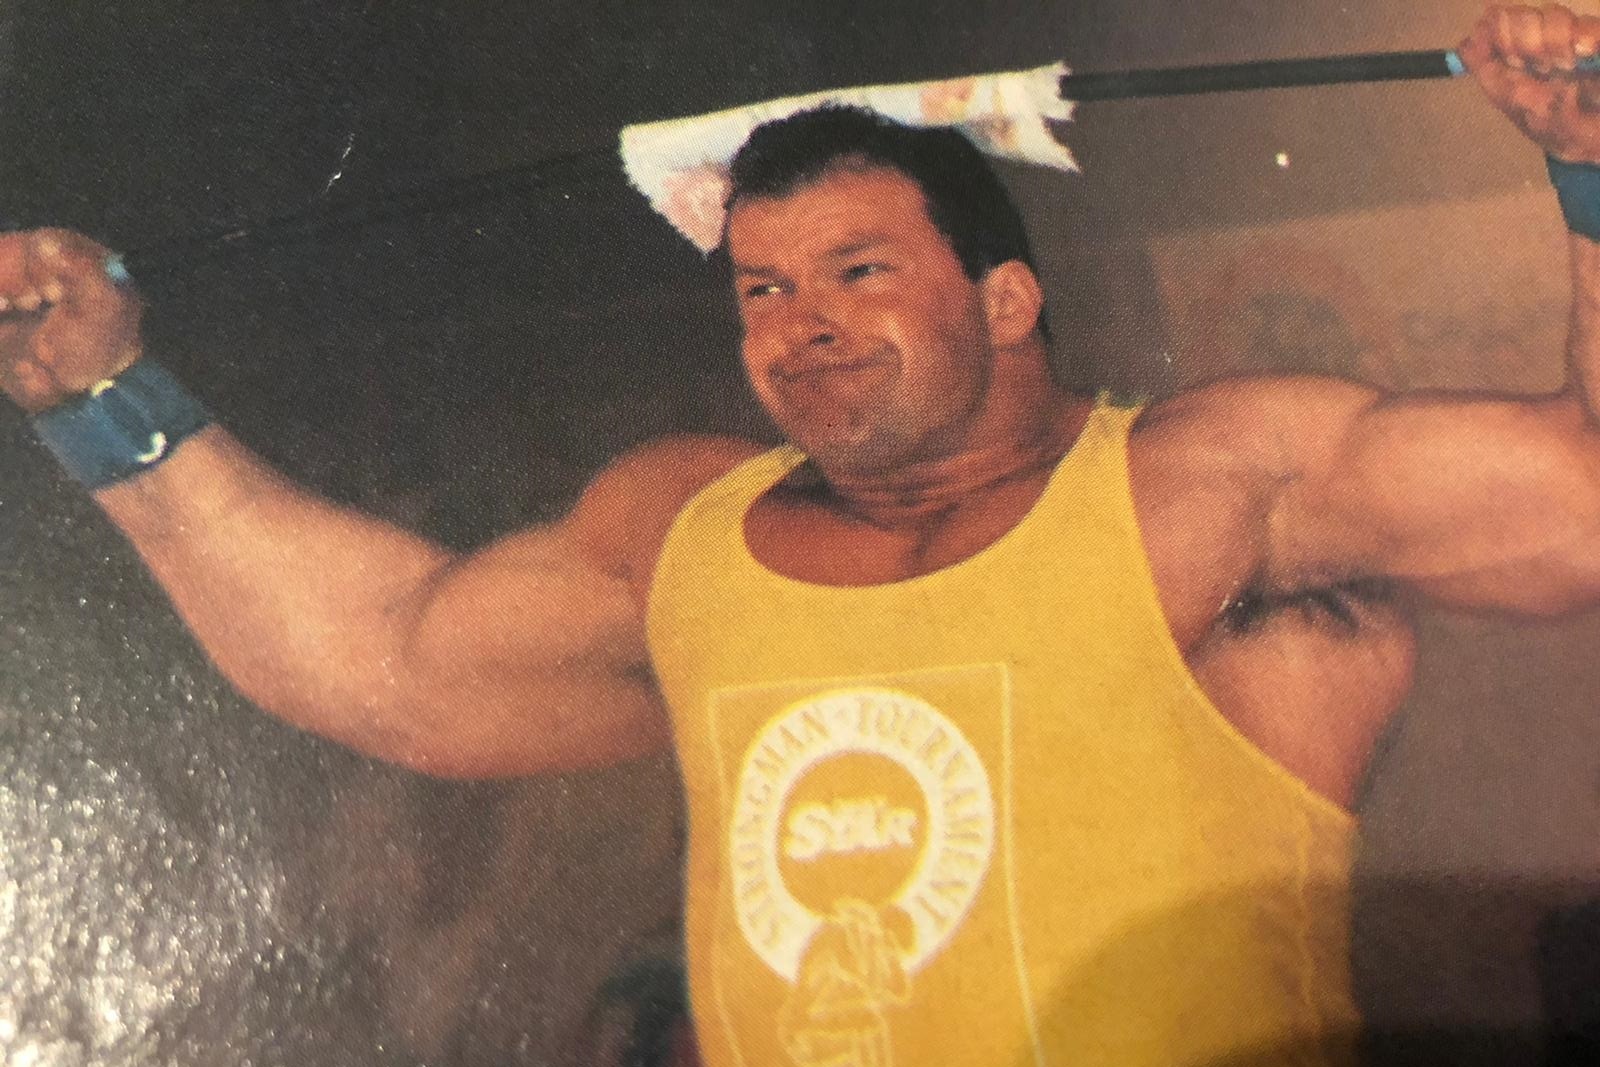 Former World's Strongest Man competitor Lee Bowers, 52, dies suddenly